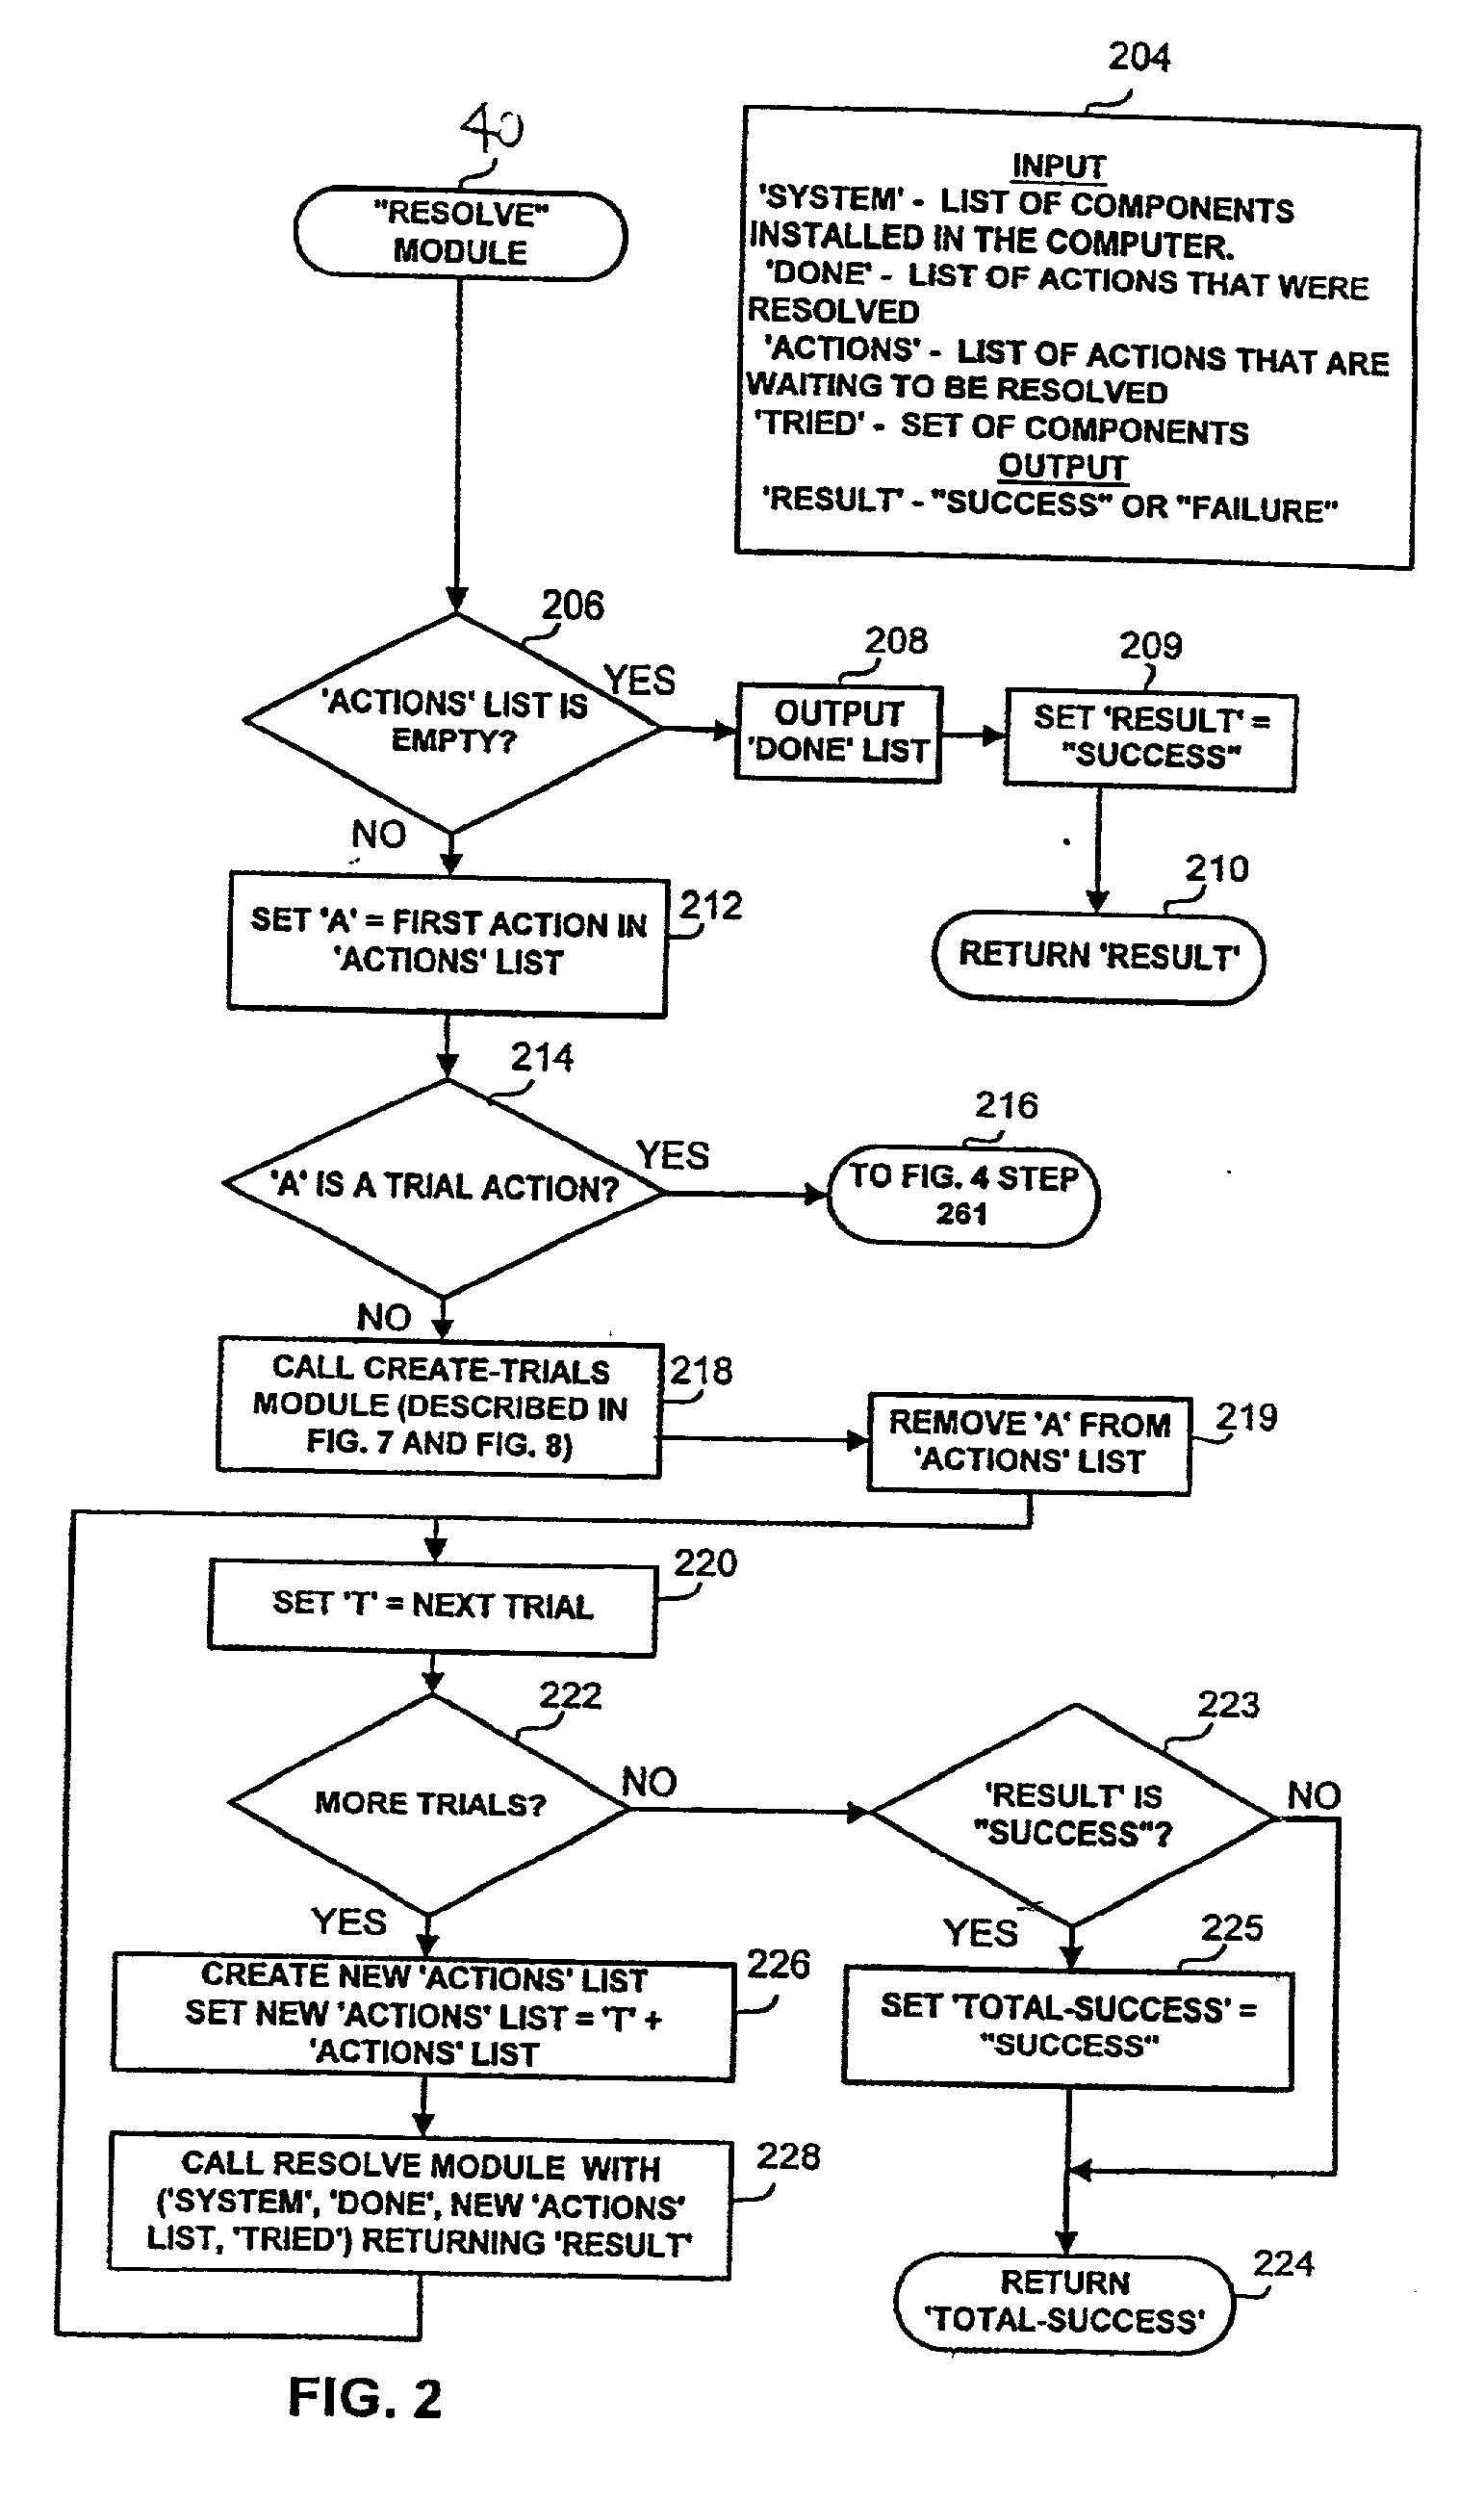 Method for resolving dependency conflicts among multiple operative entities within a computing environment